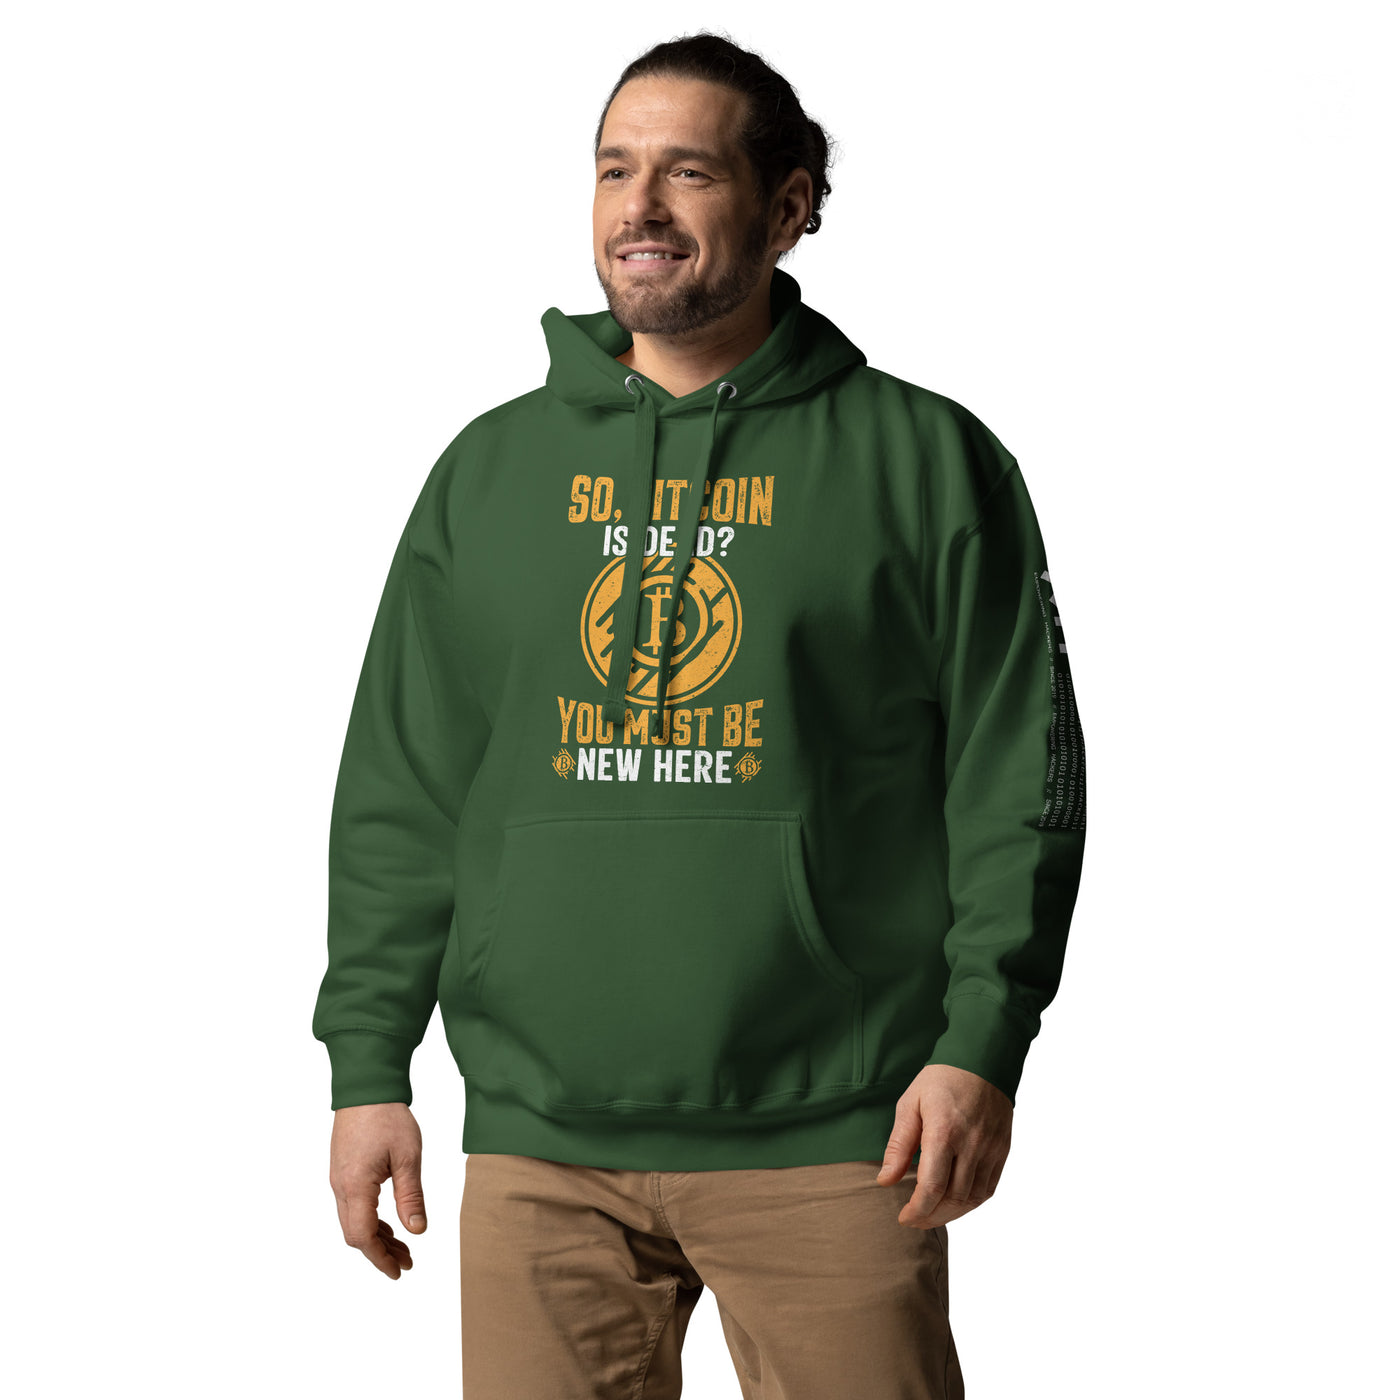 So, Bitcoin is Dead? You must be new here - Unisex Hoodie